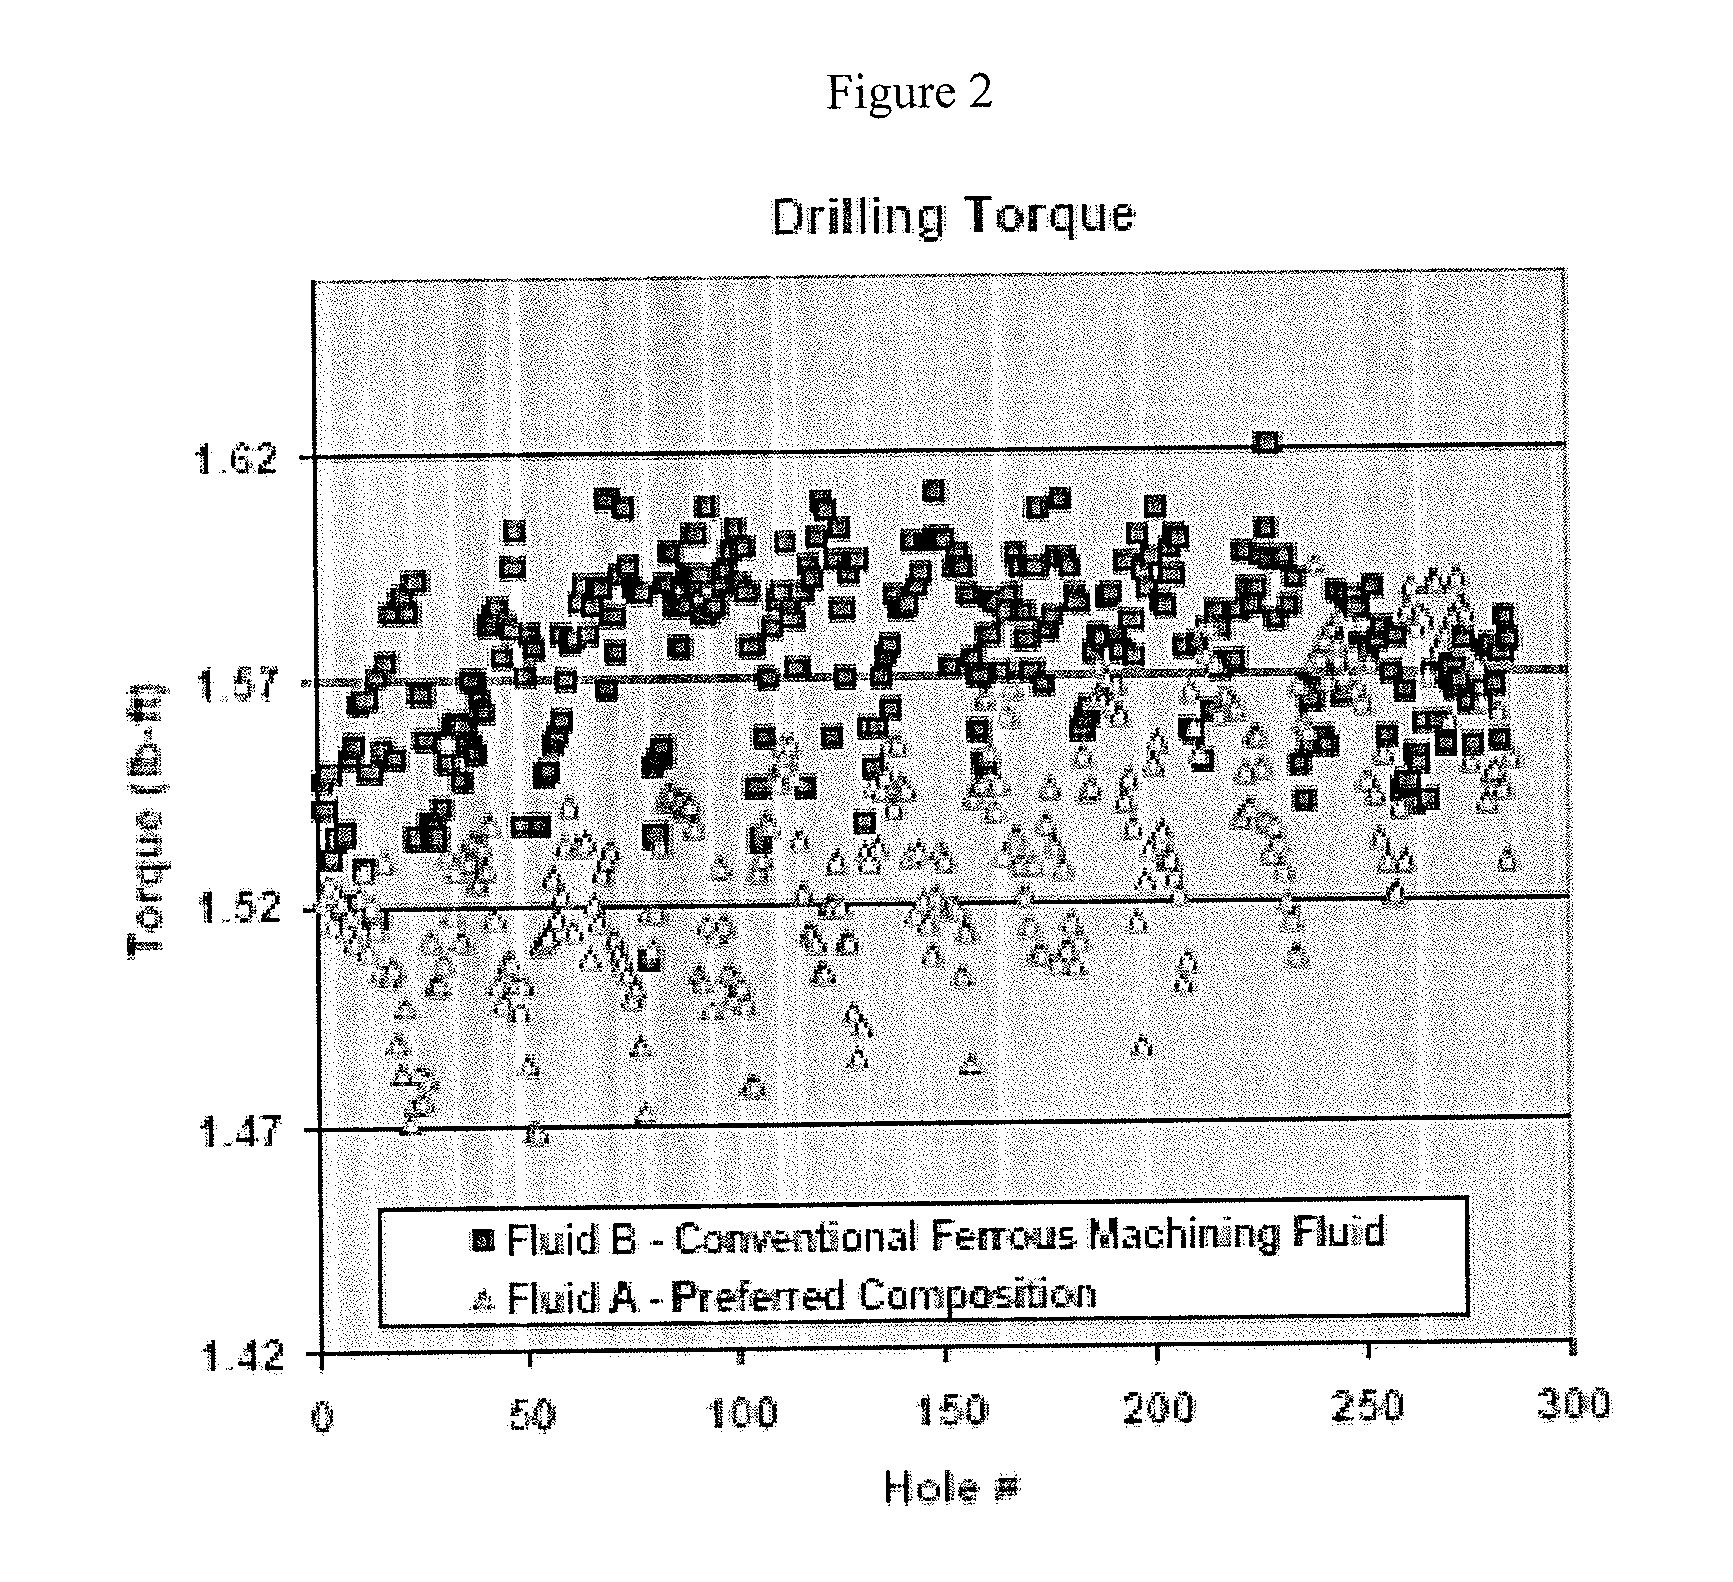 Metalworking fluid composition and method for its use in the machining of compacted graphite iron